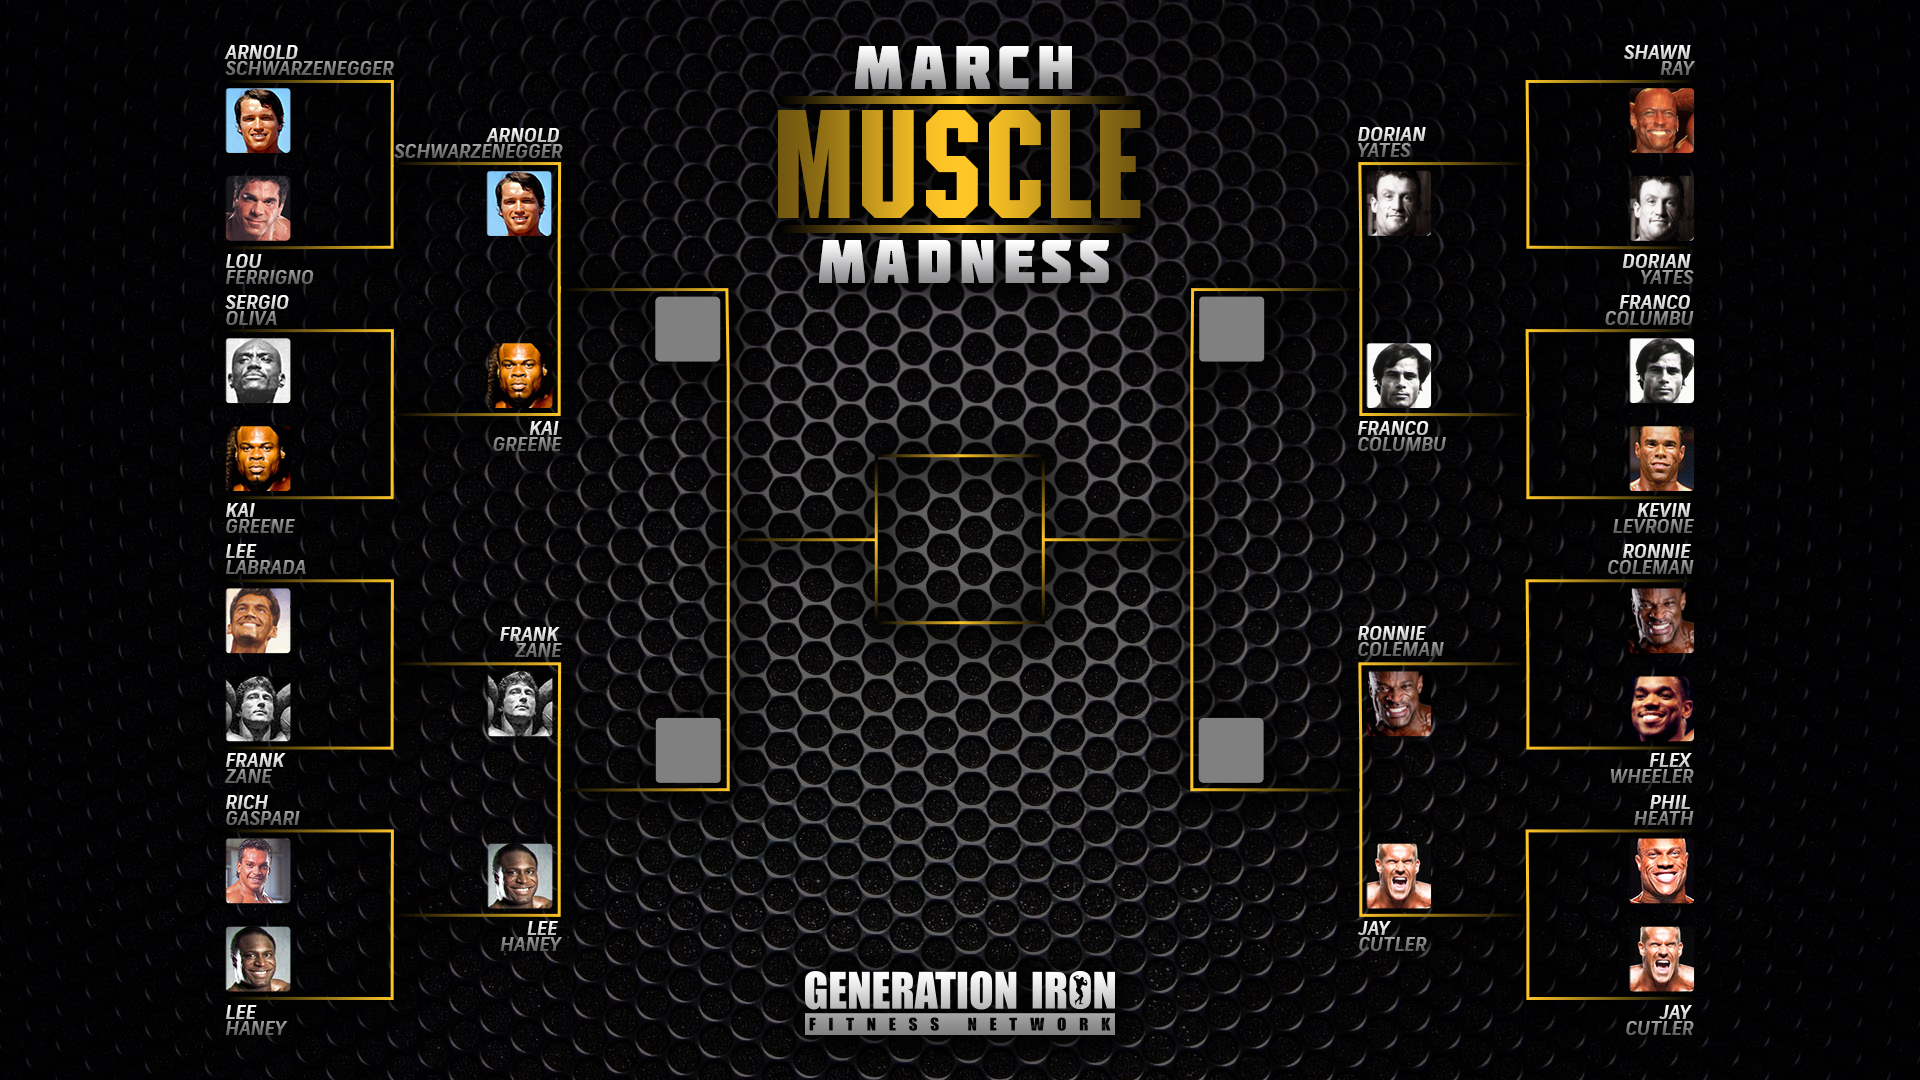 Generation Iron March Muscle Madness Tournament Quarter finals